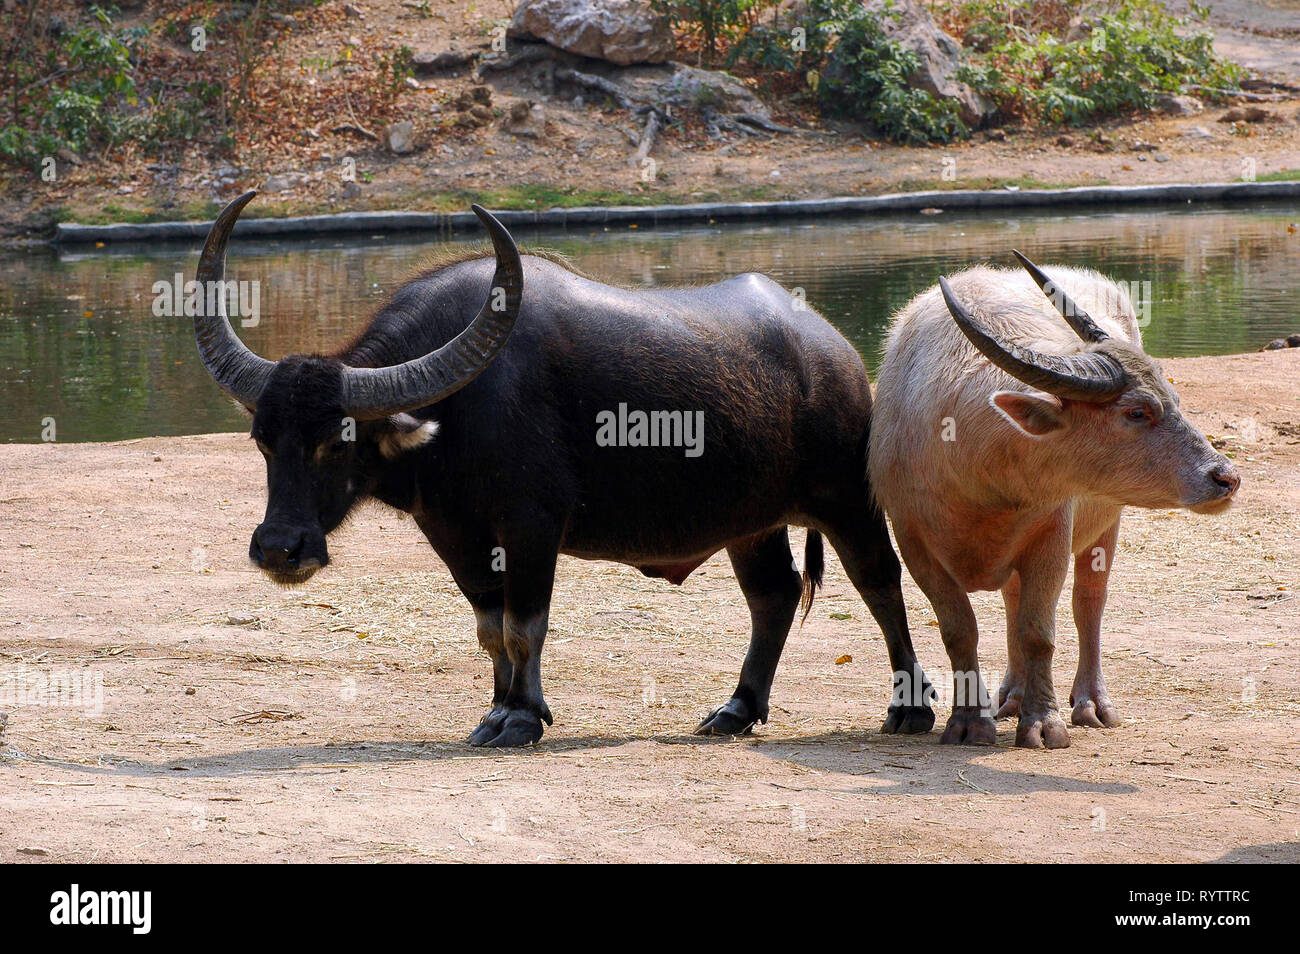 Asian Water Buffalo High Resolution Stock Photography and Images - Alamy